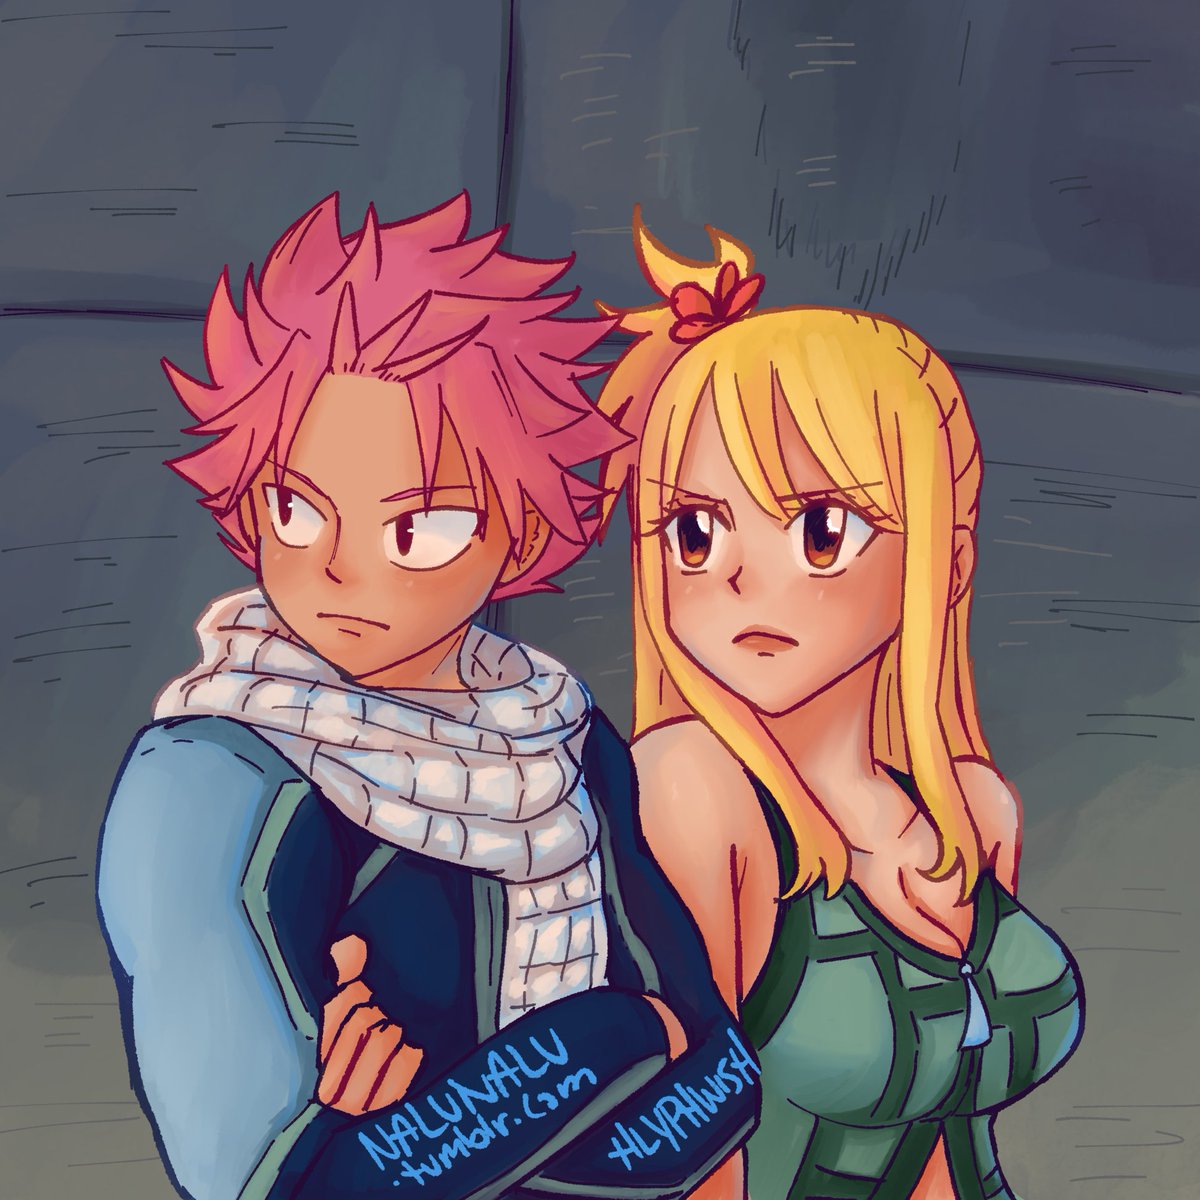 #nalu #fairytail redraw from edolas arc :] - one of my fave arts recently